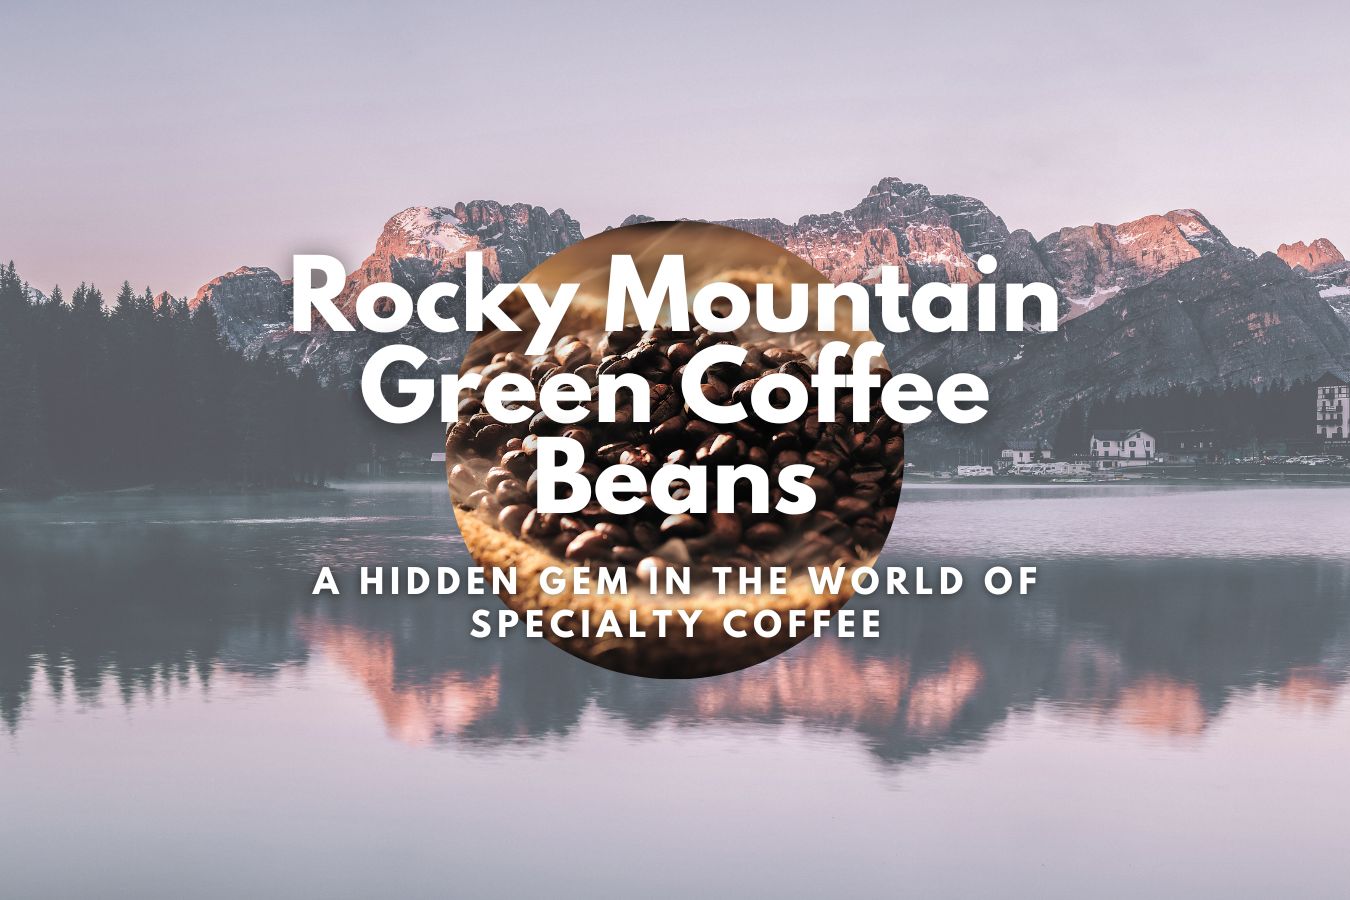 Rocky Mountain Green Coffee Beans A Hidden Gem in the World of Specialty Coffee